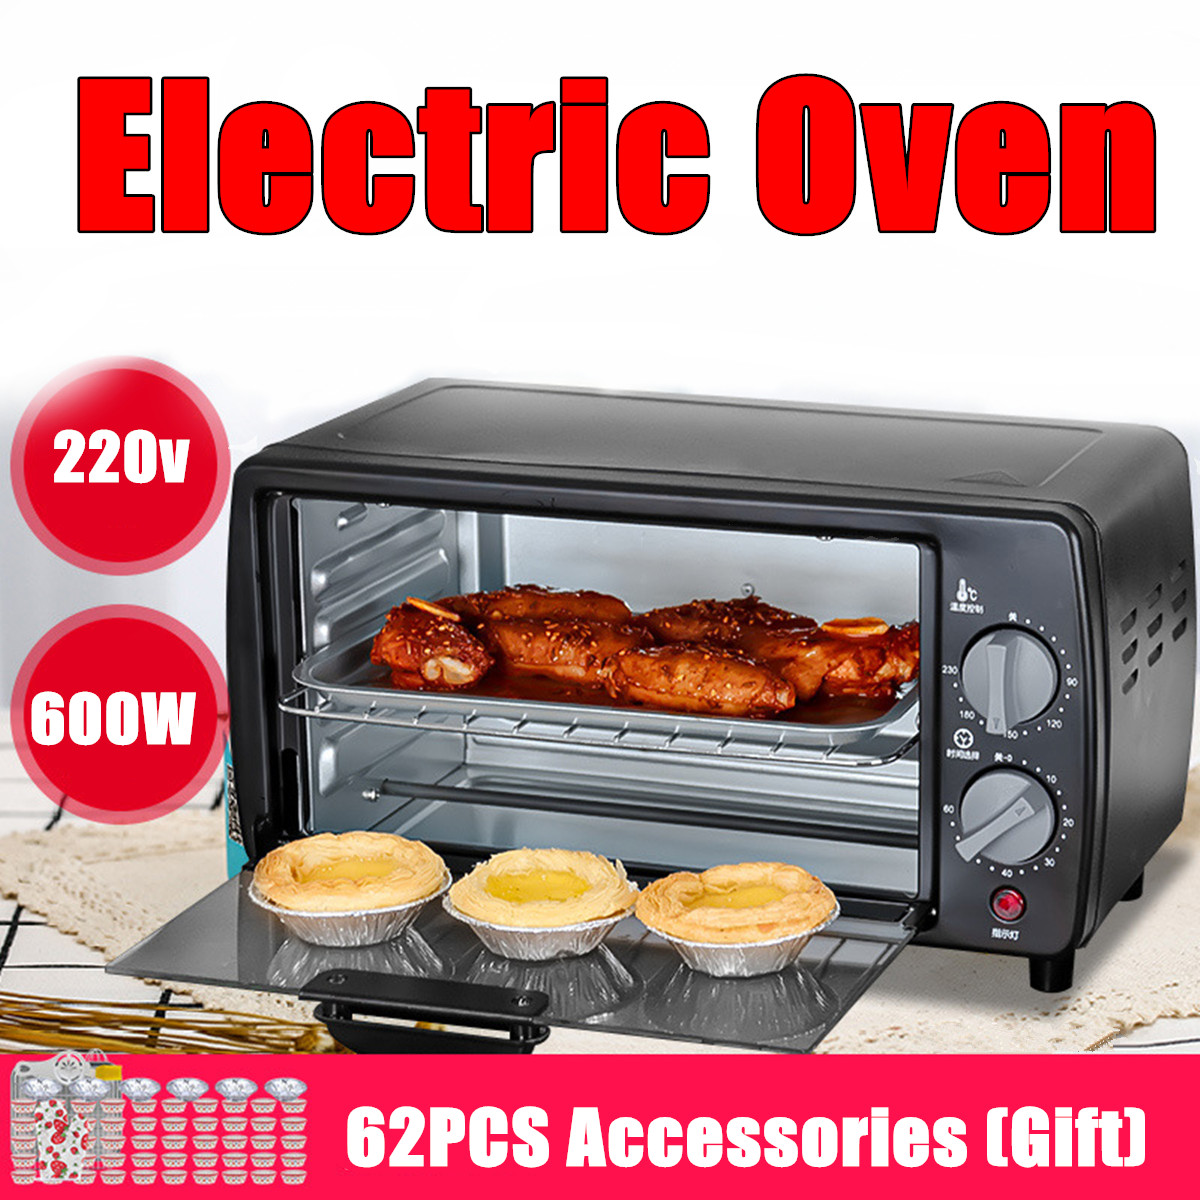 9L-220V-Benchtop-Electric-Oven-Timing-Household-Temperature-Control-Bake-Toast-1651930-4